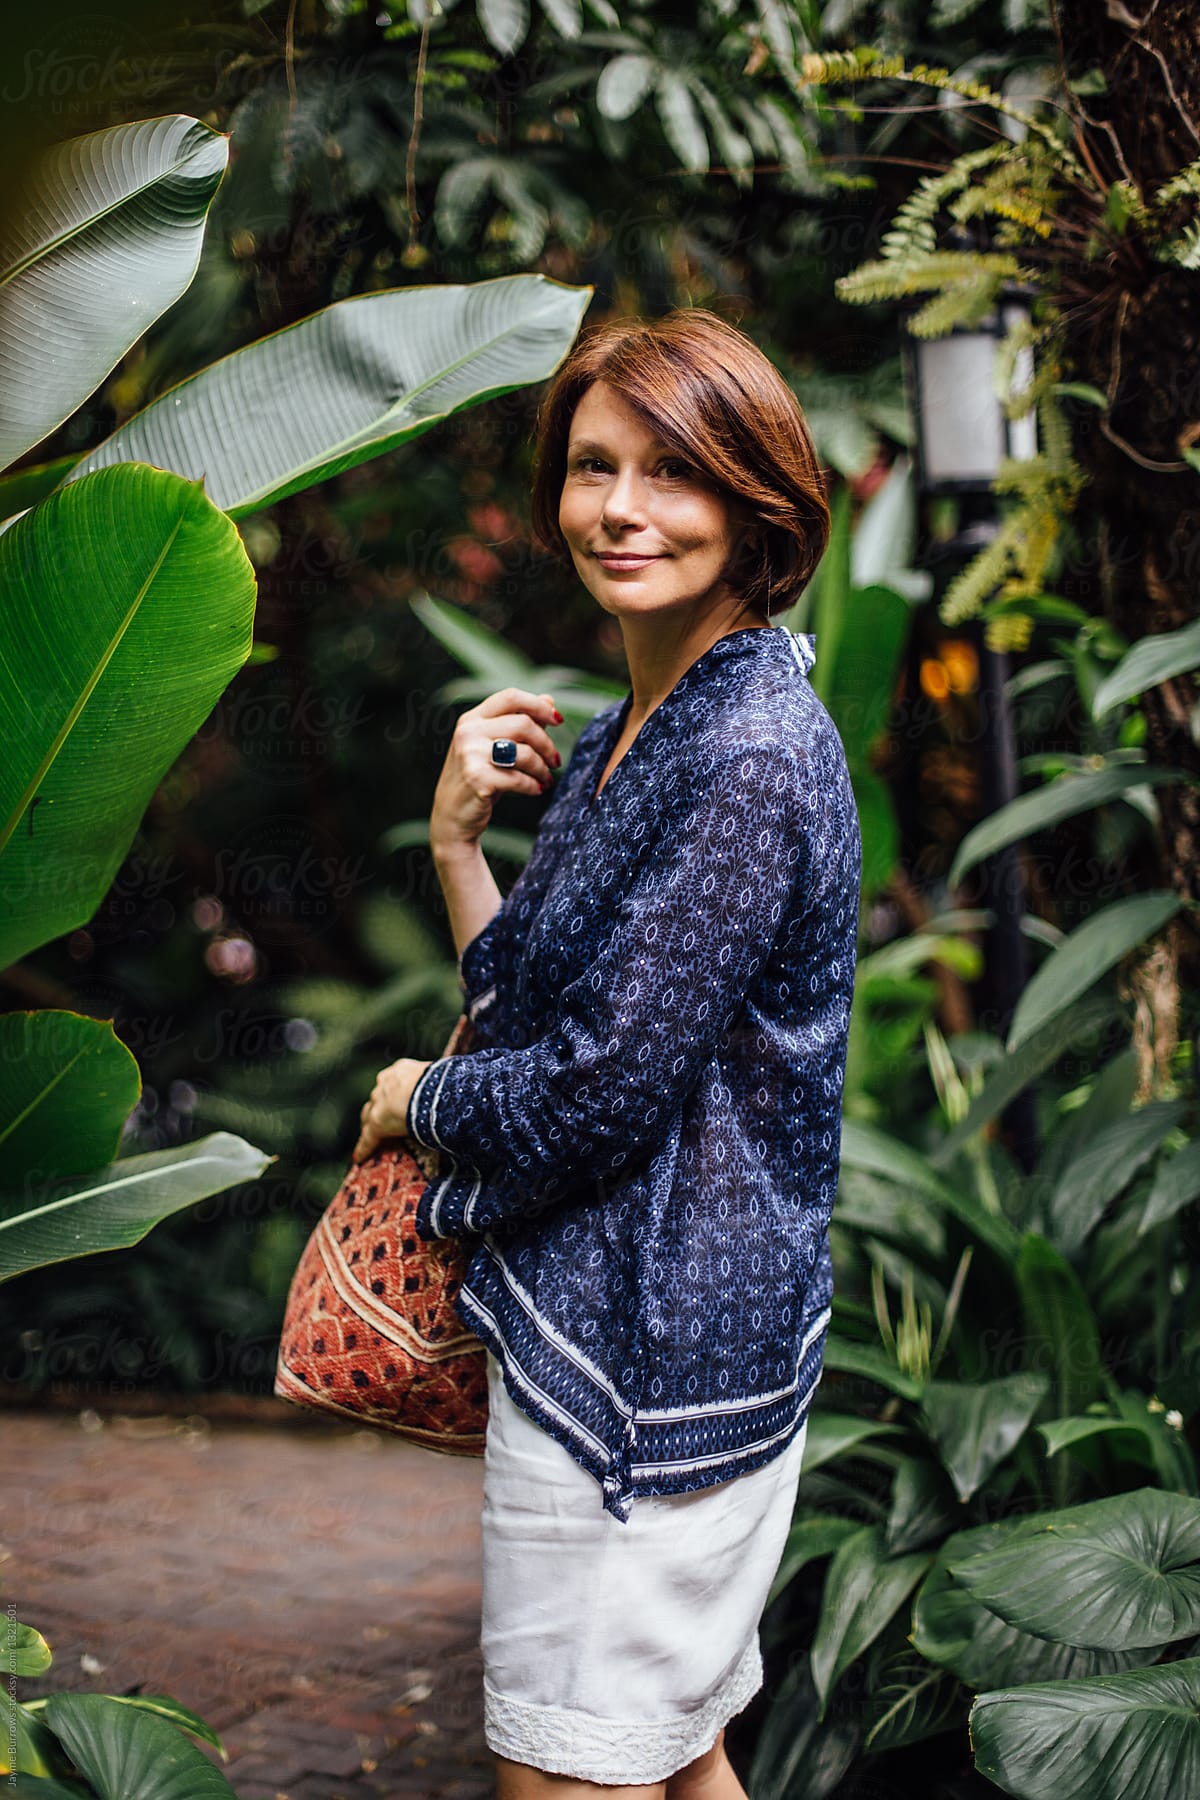 Portrait Of An Elegant Woman In A Tropical Setting By Stocksy